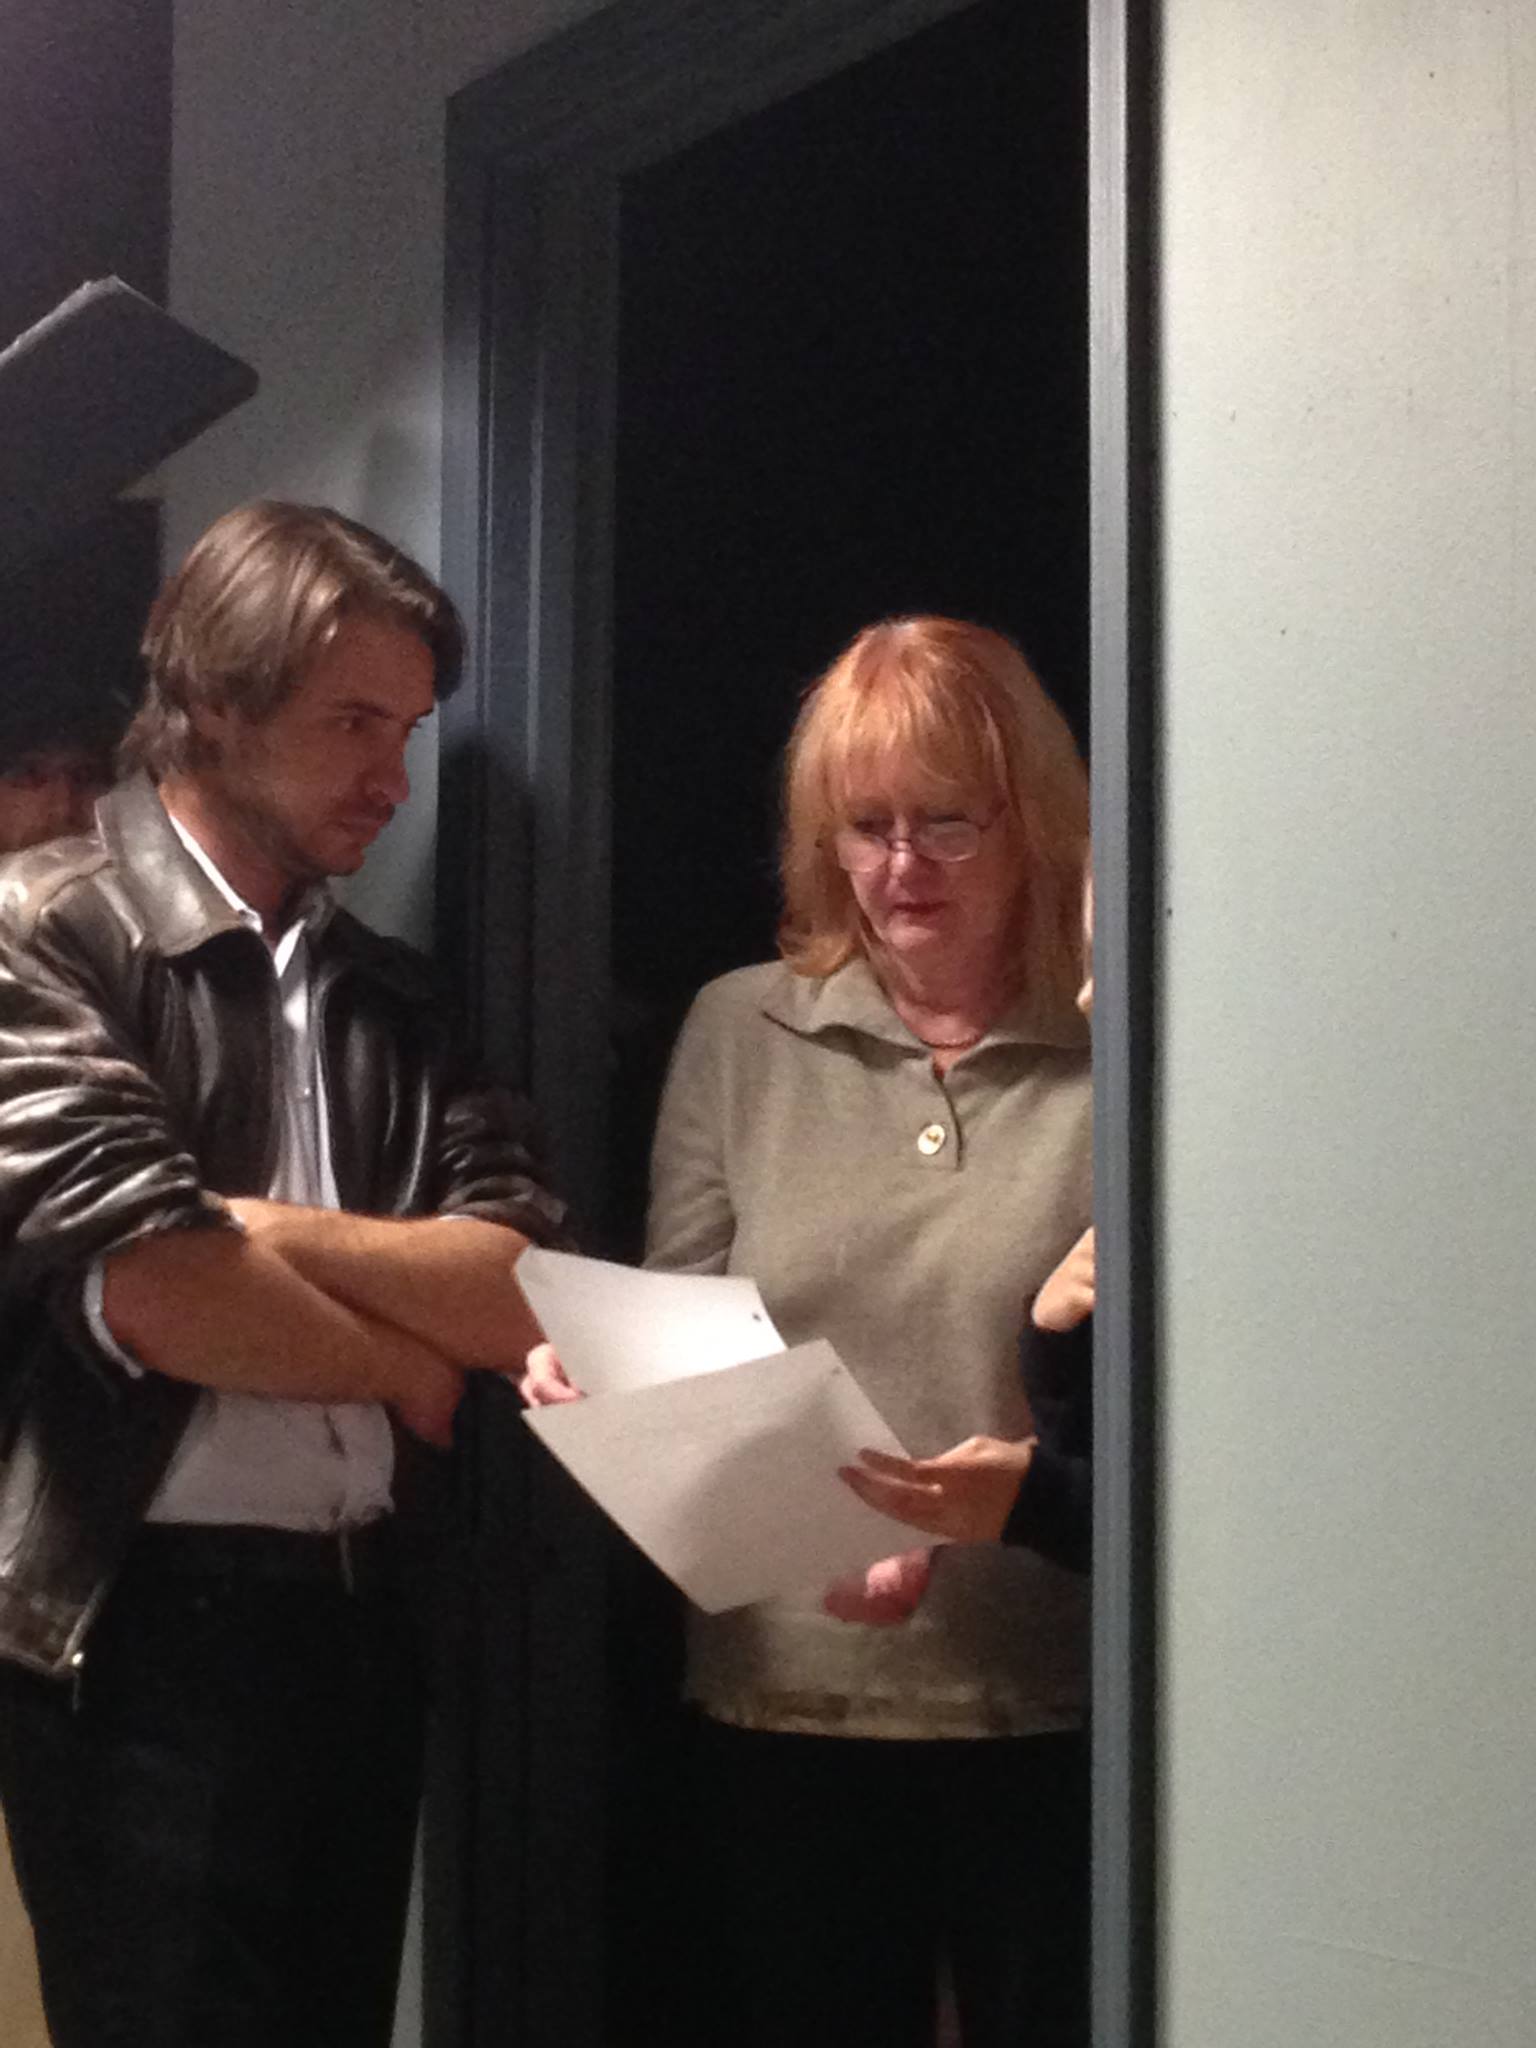 Greg Albanetti with director Helen Stringer in The Gloaming.